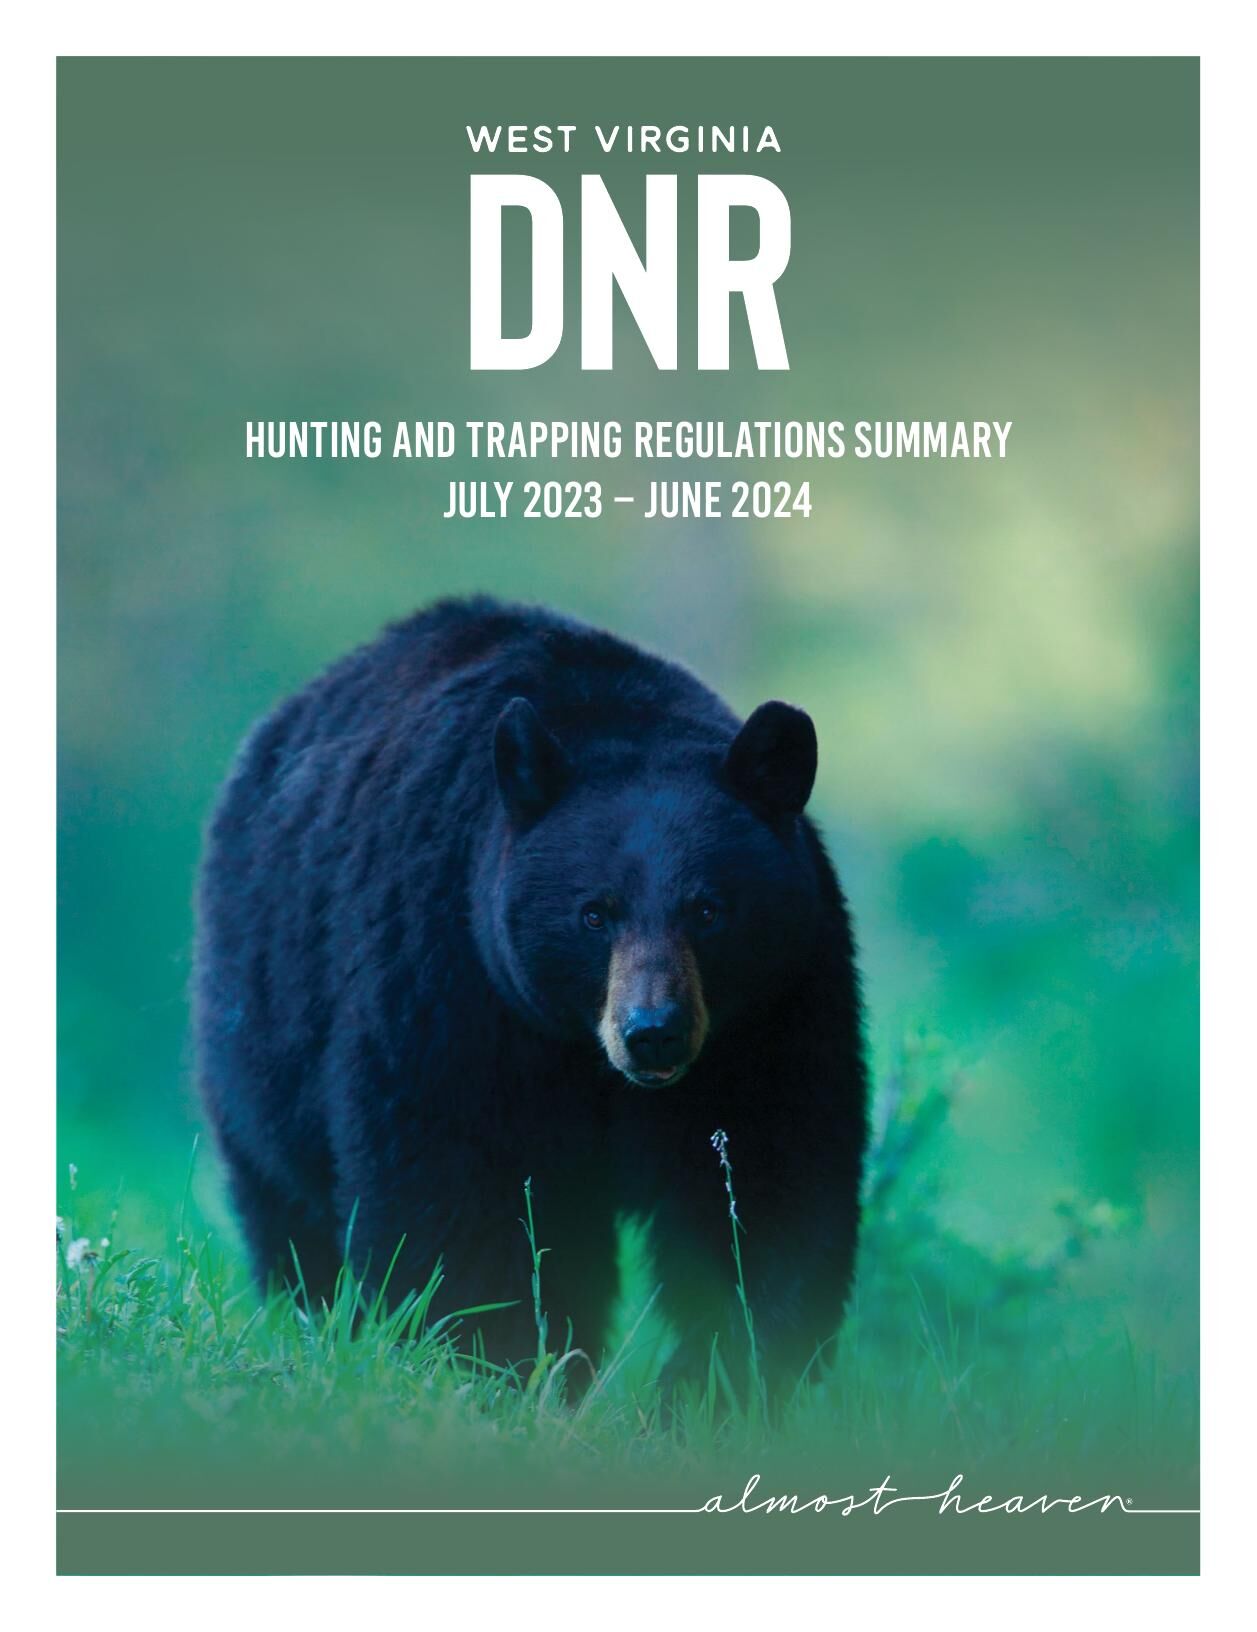 WVDNR hunting & trapping regulations